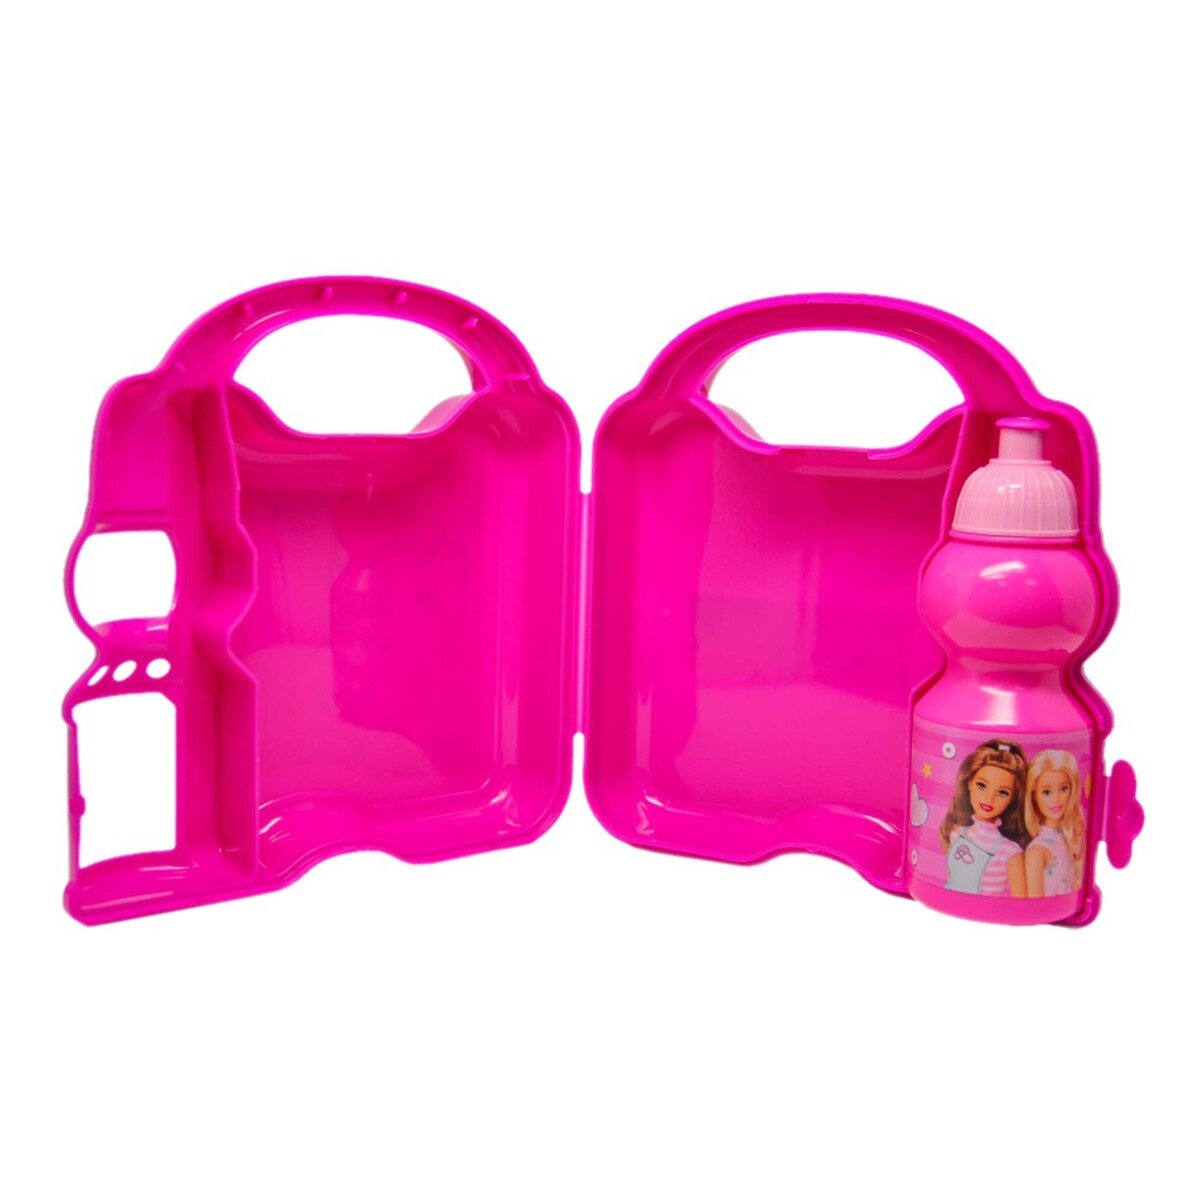 Barbie Combo Set Lunch Box with Water Bottle 45-0801